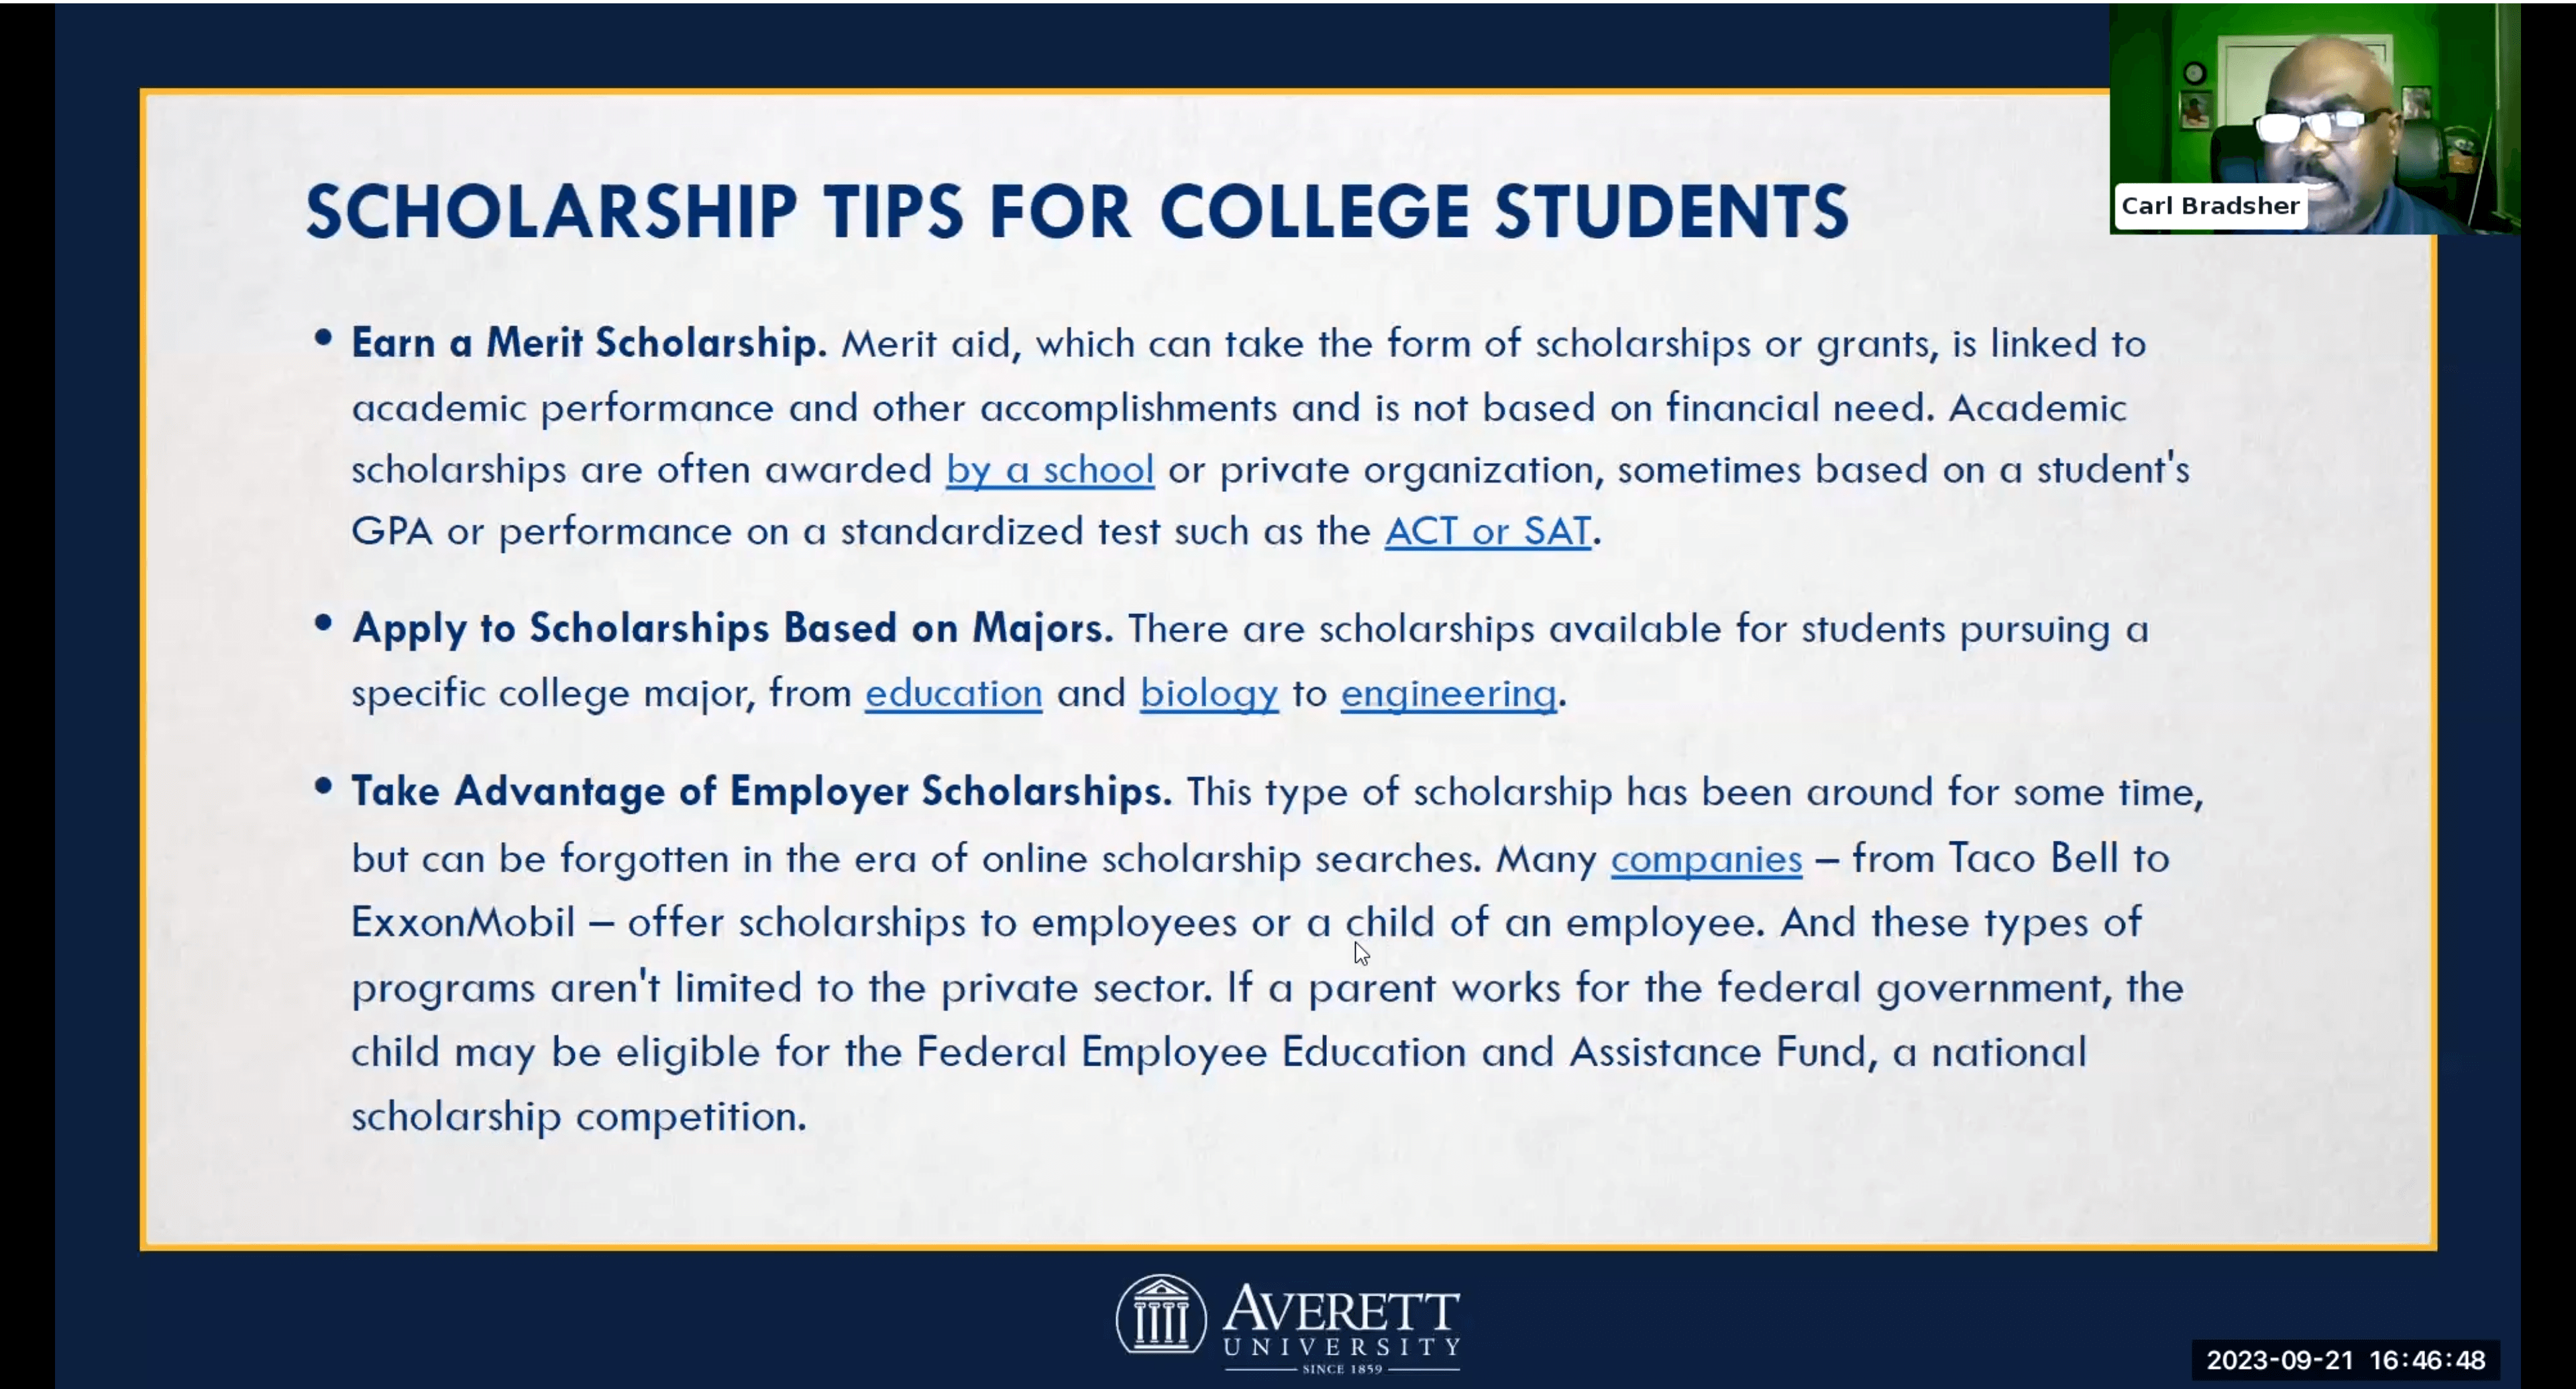 Advice: Apply early and quickly for scholarships with deadlines in April to secure funds for tuition